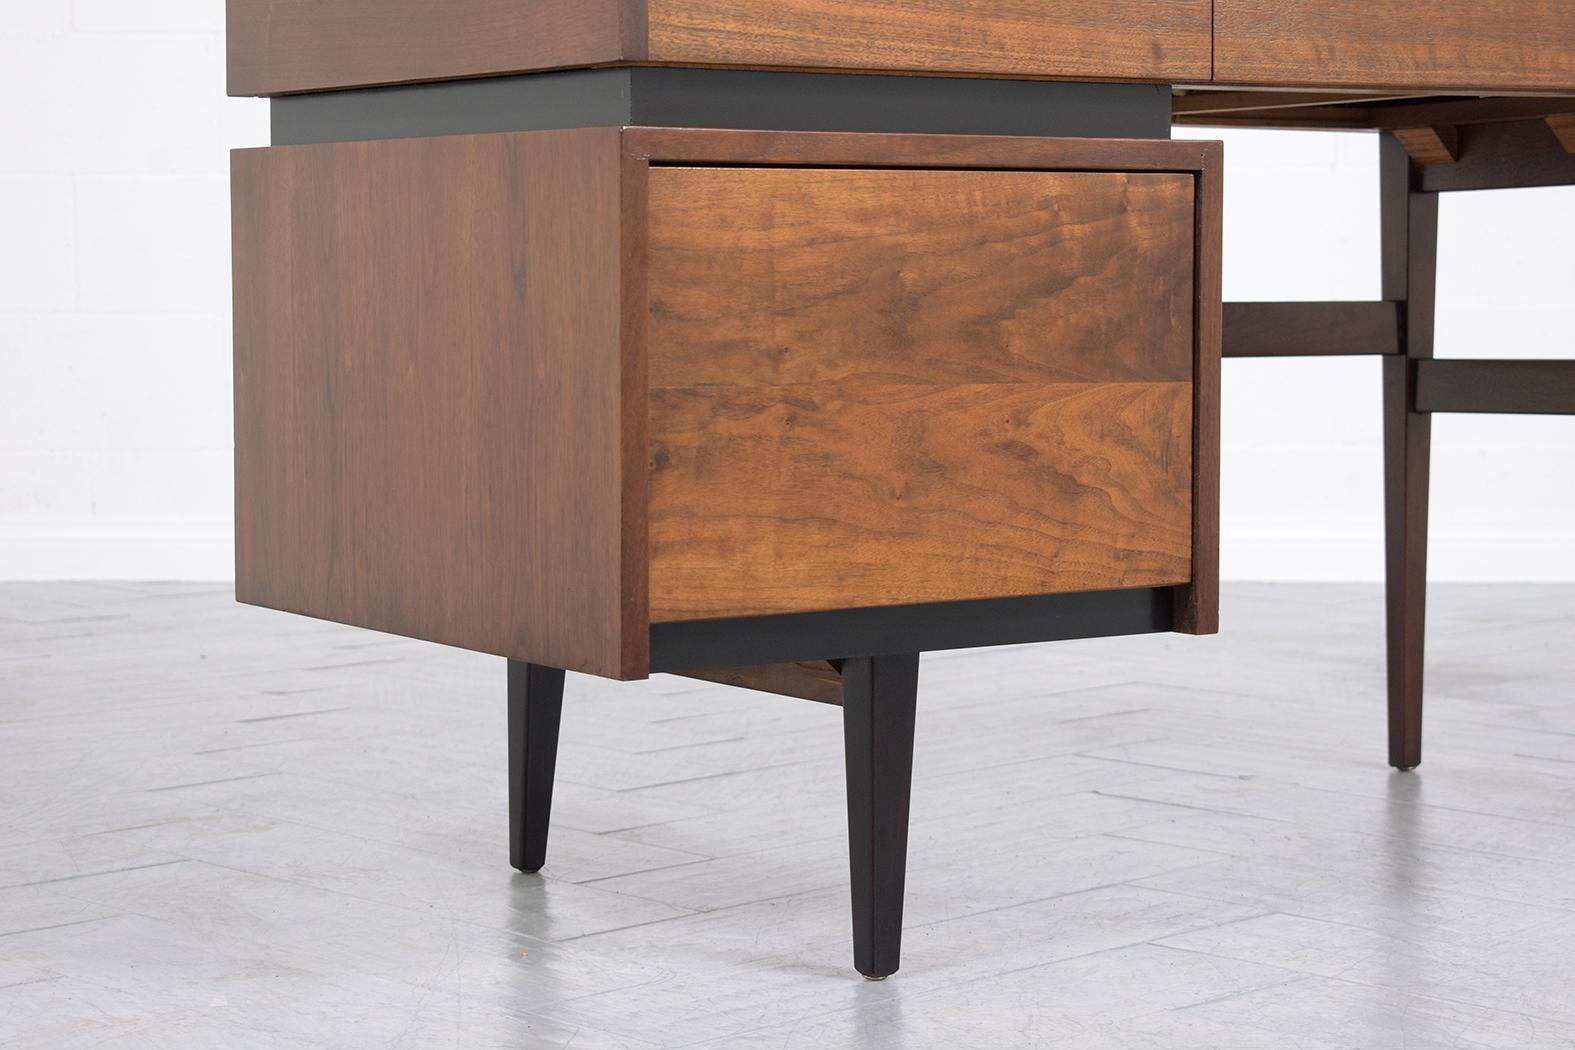 1960s Lacquered Mid-Century Modern Desk 3